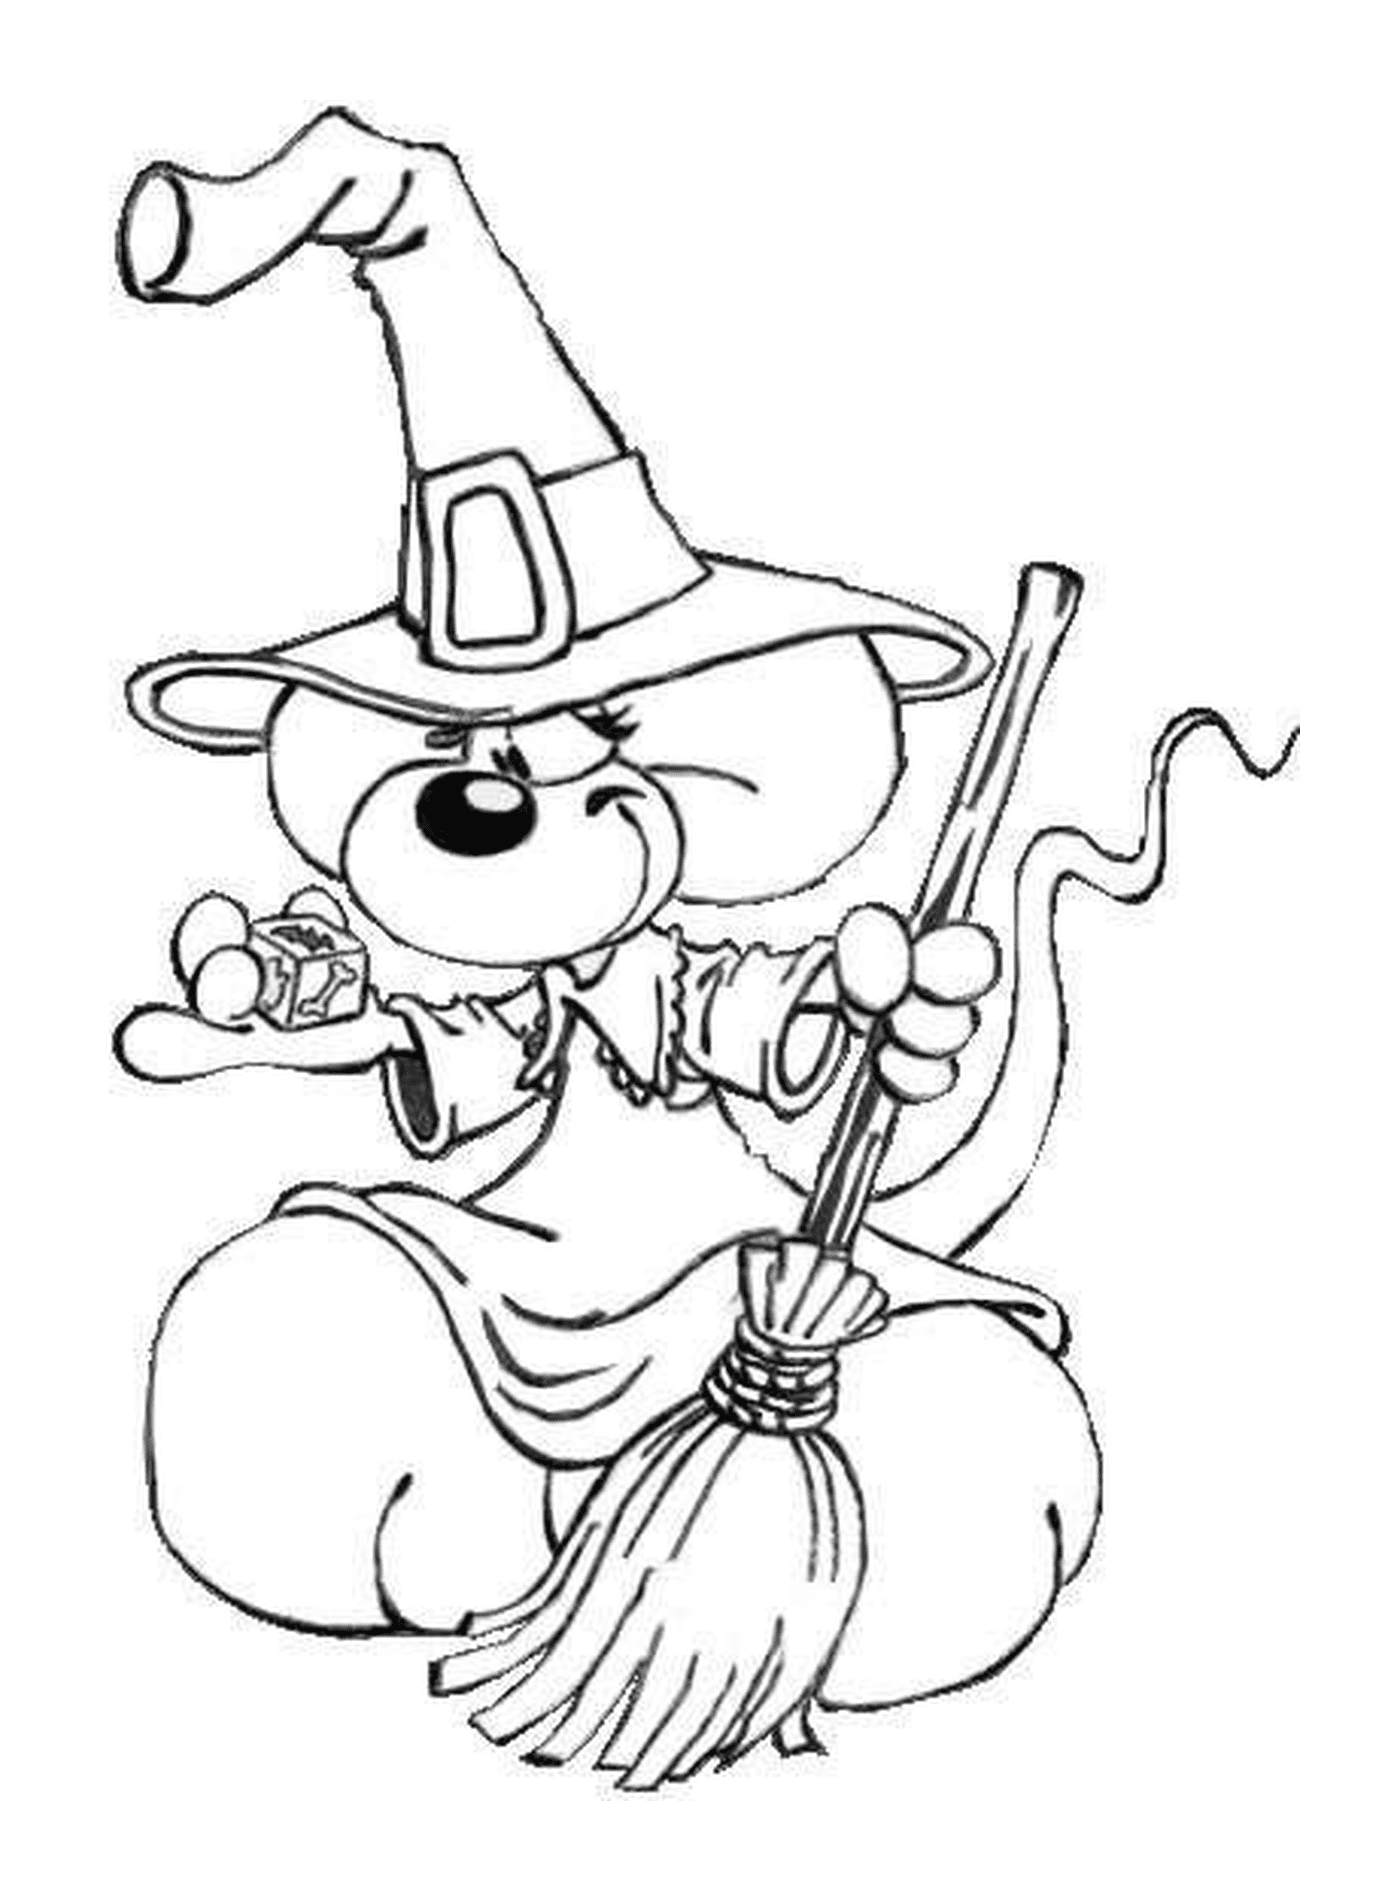  Diddle disguised as a witch 